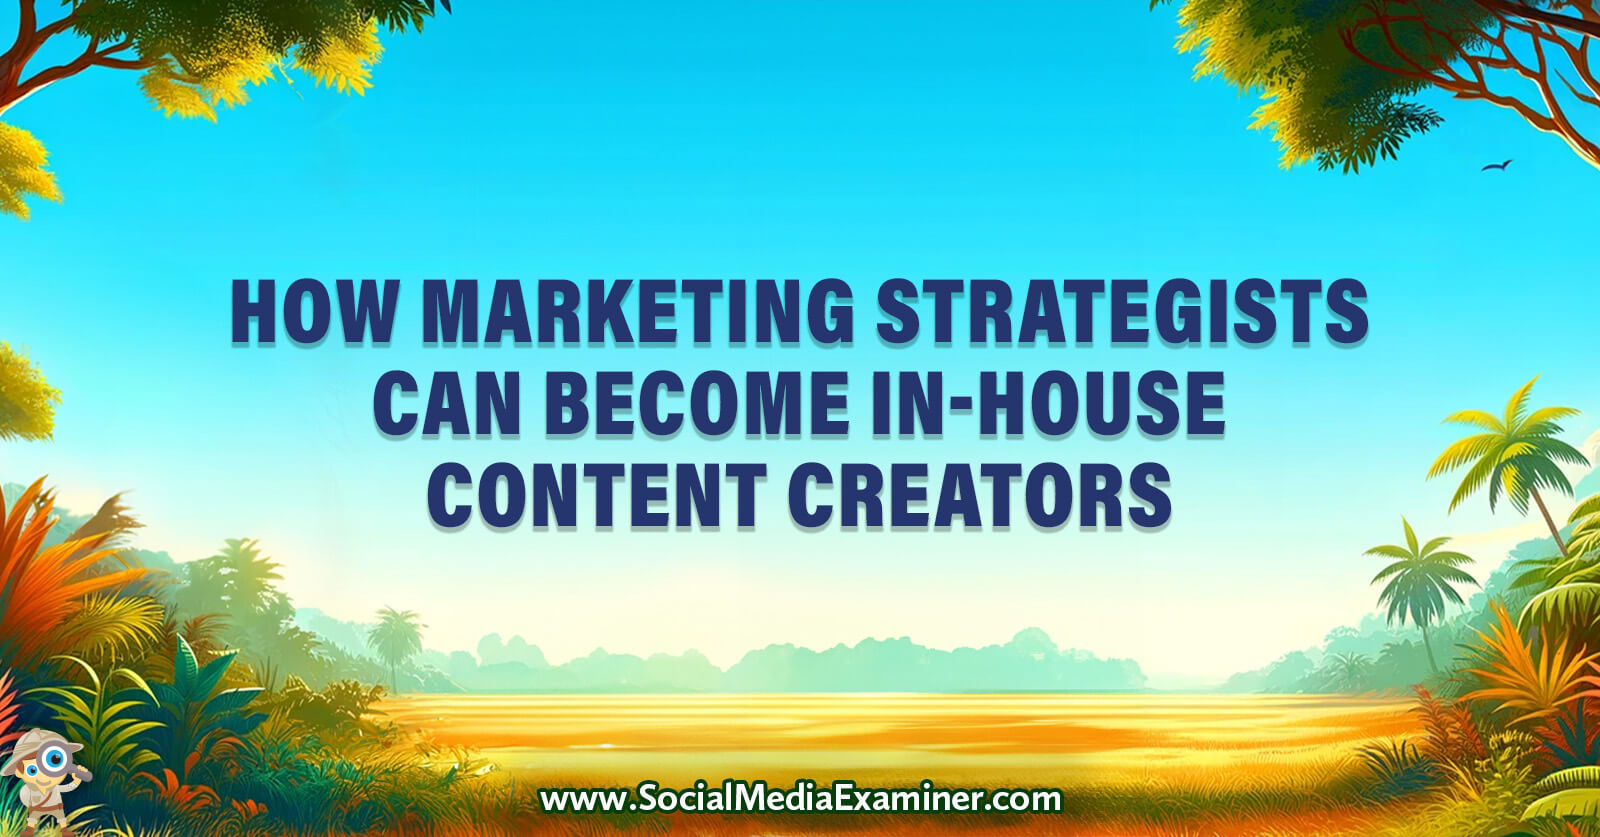 How Marketing Strategists Can Become In-House Content Creators by Social Media Examiner